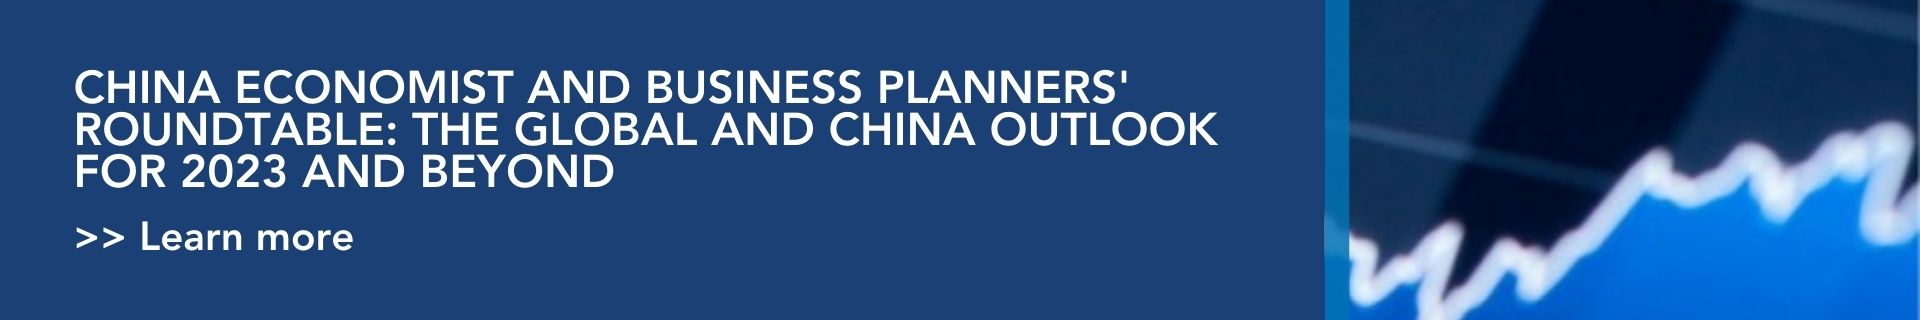 China-Economist-and-Business-Planners-Roundtable